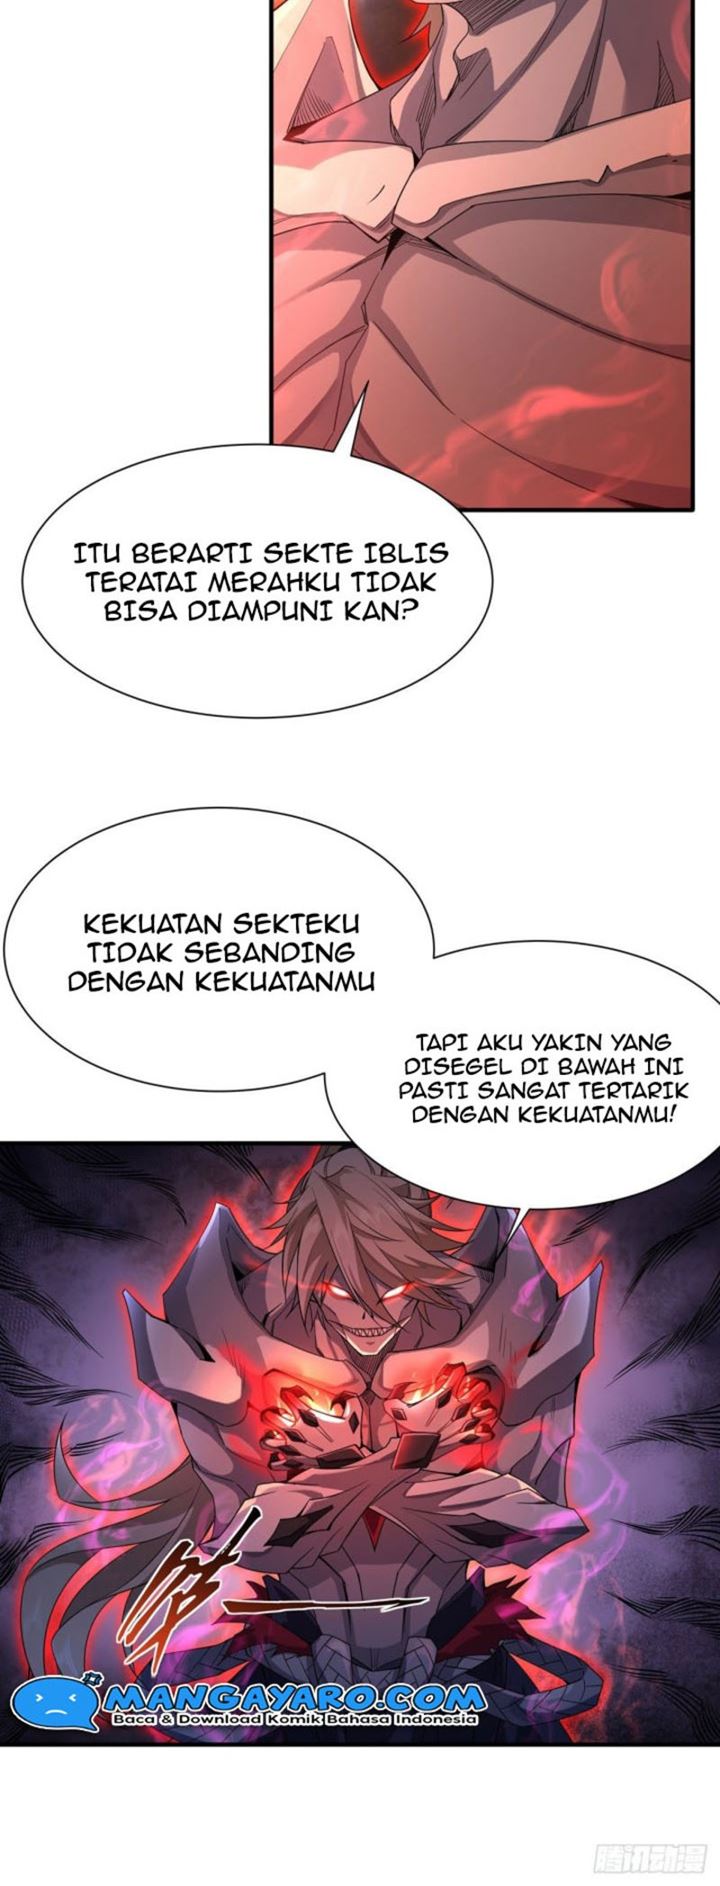 Dilarang COPAS - situs resmi www.mangacanblog.com - Komik my female apprentices are all big shots from the future 021 - chapter 21 22 Indonesia my female apprentices are all big shots from the future 021 - chapter 21 Terbaru 5|Baca Manga Komik Indonesia|Mangacan